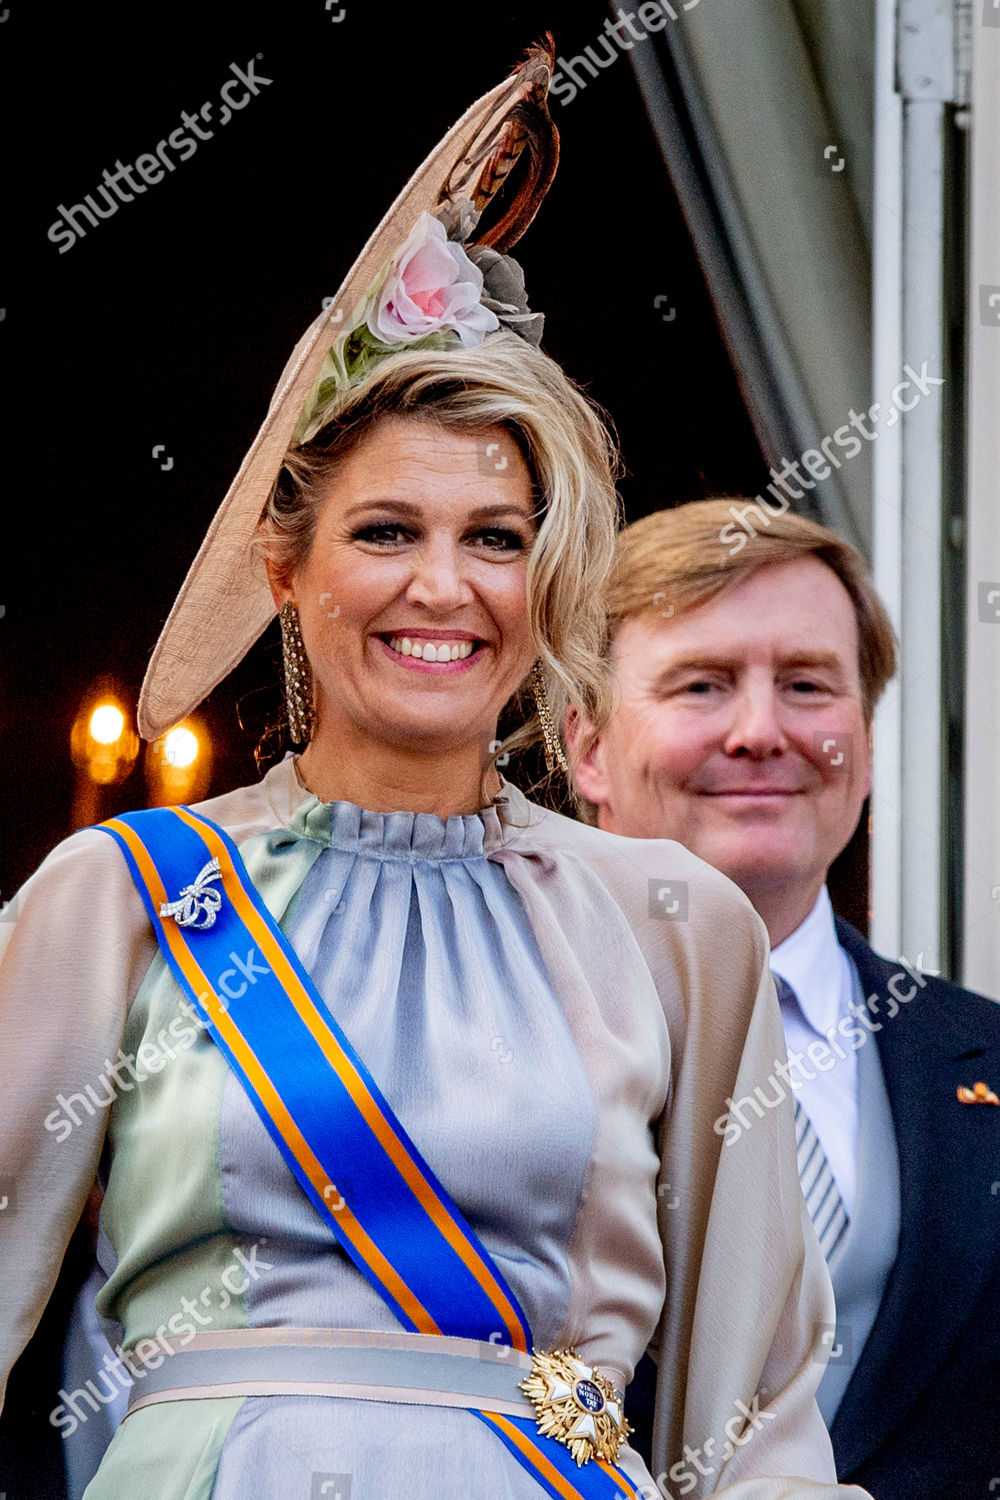 opening-of-the-parliamentary-season-the-hague-the-netherlands-shutterstock-editorial-9885898af.jpg